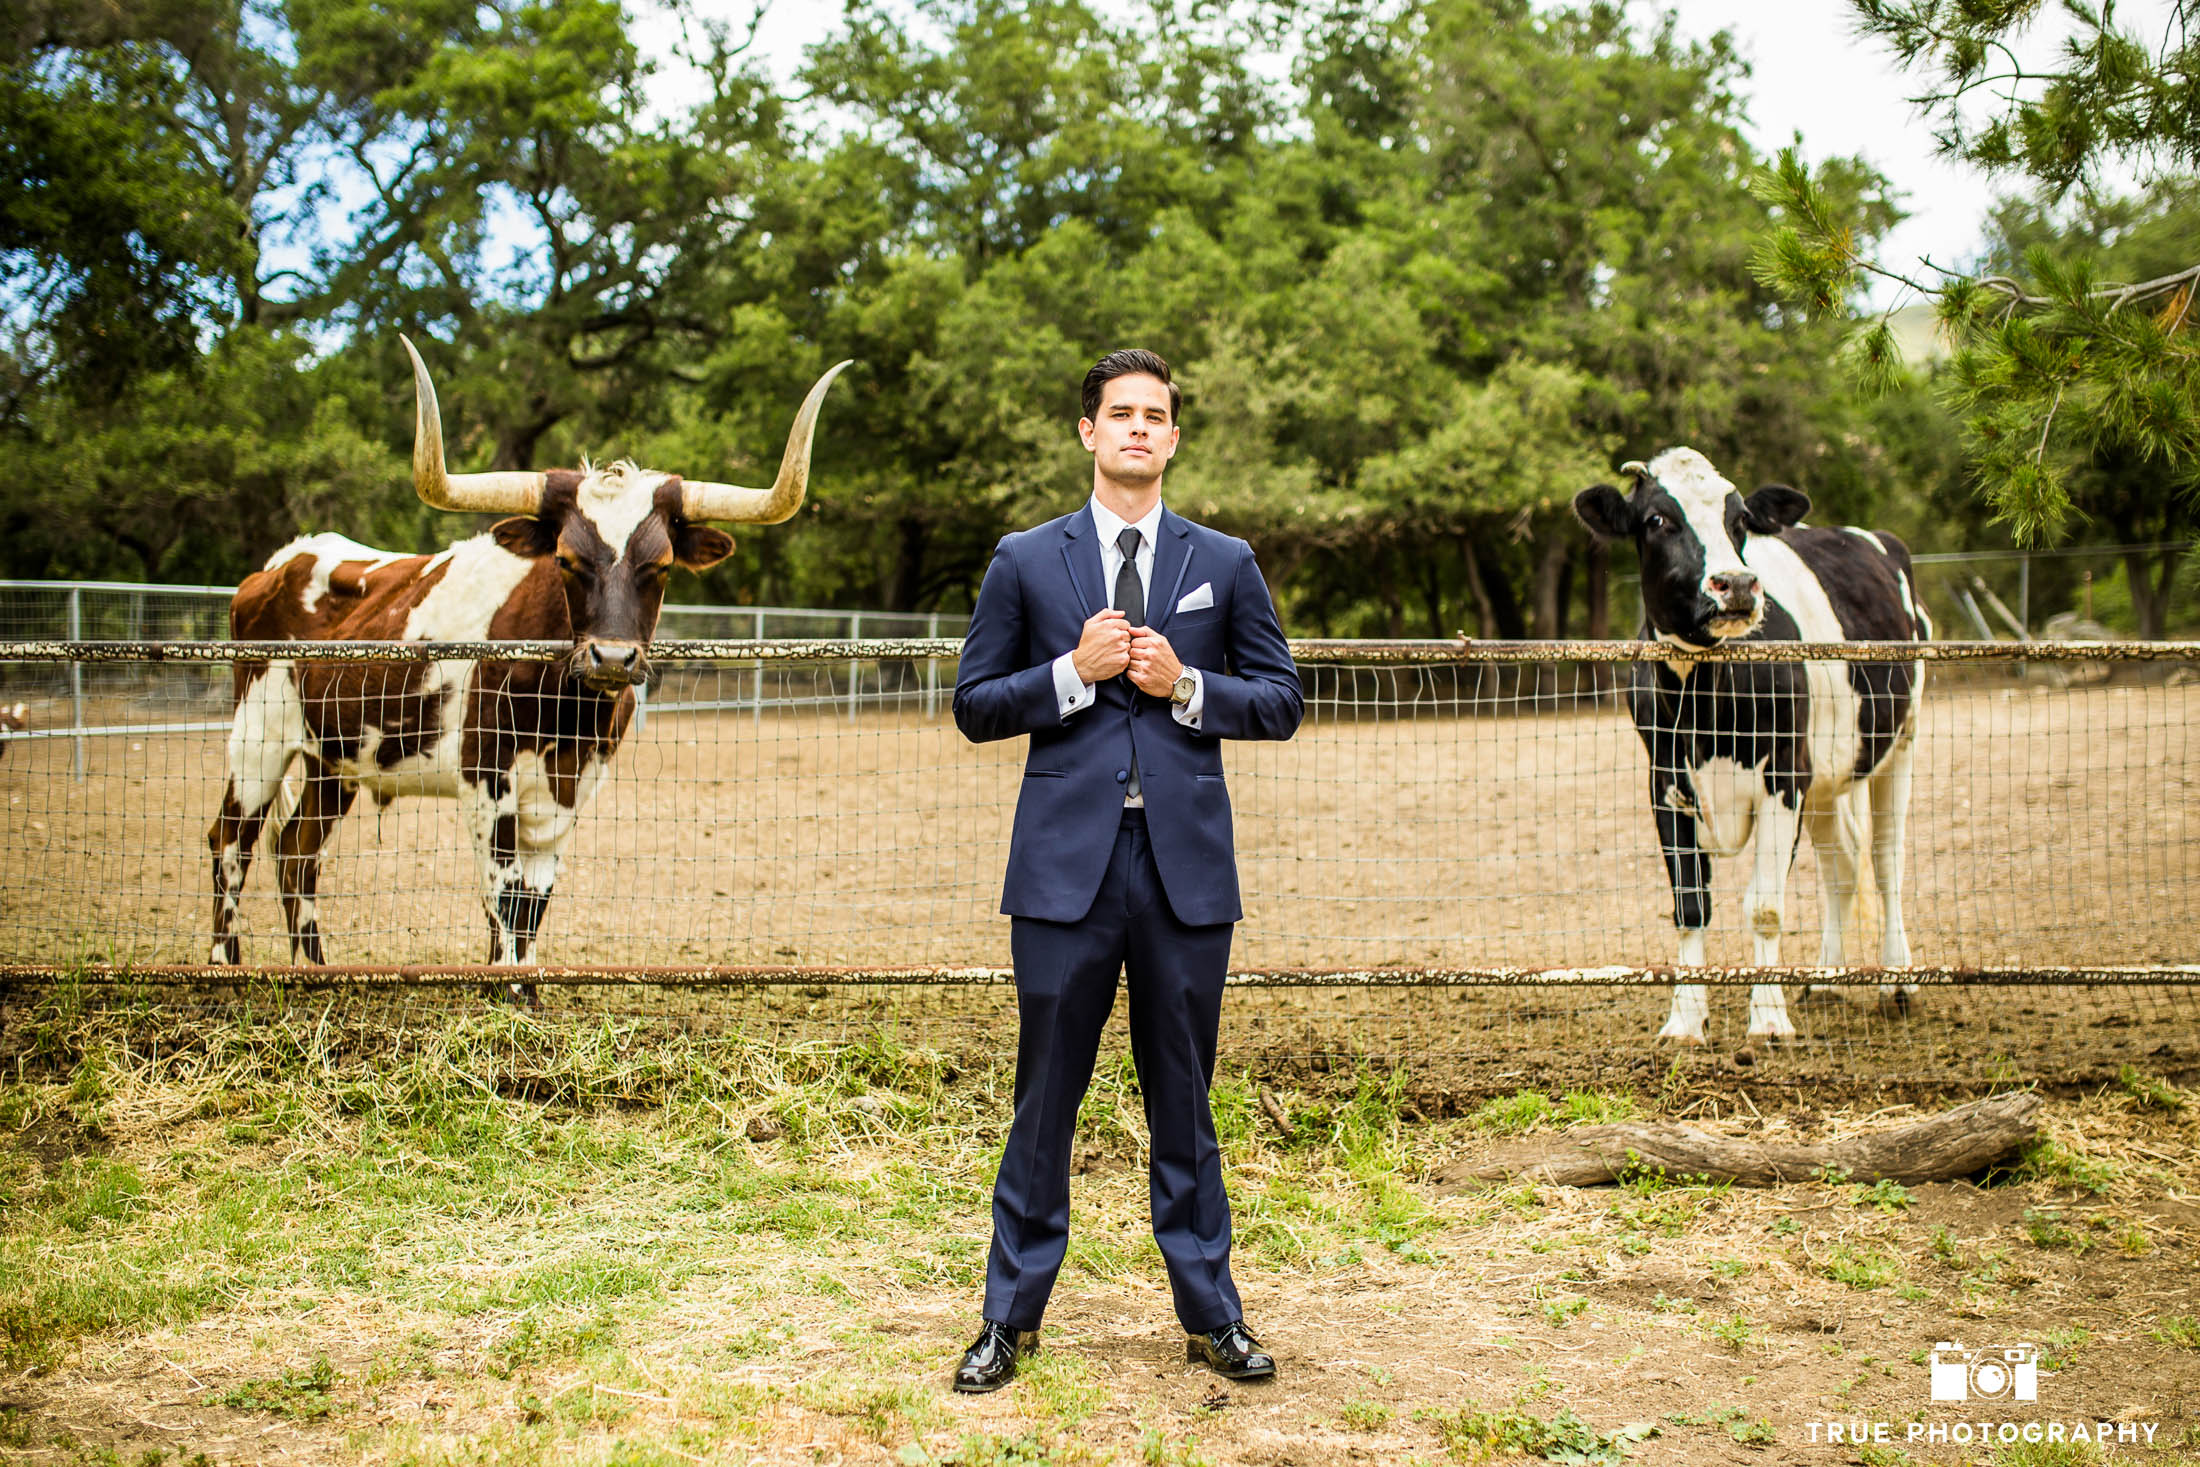 Groom poses in front of cattle at rustic outdoor ranch on wedding day